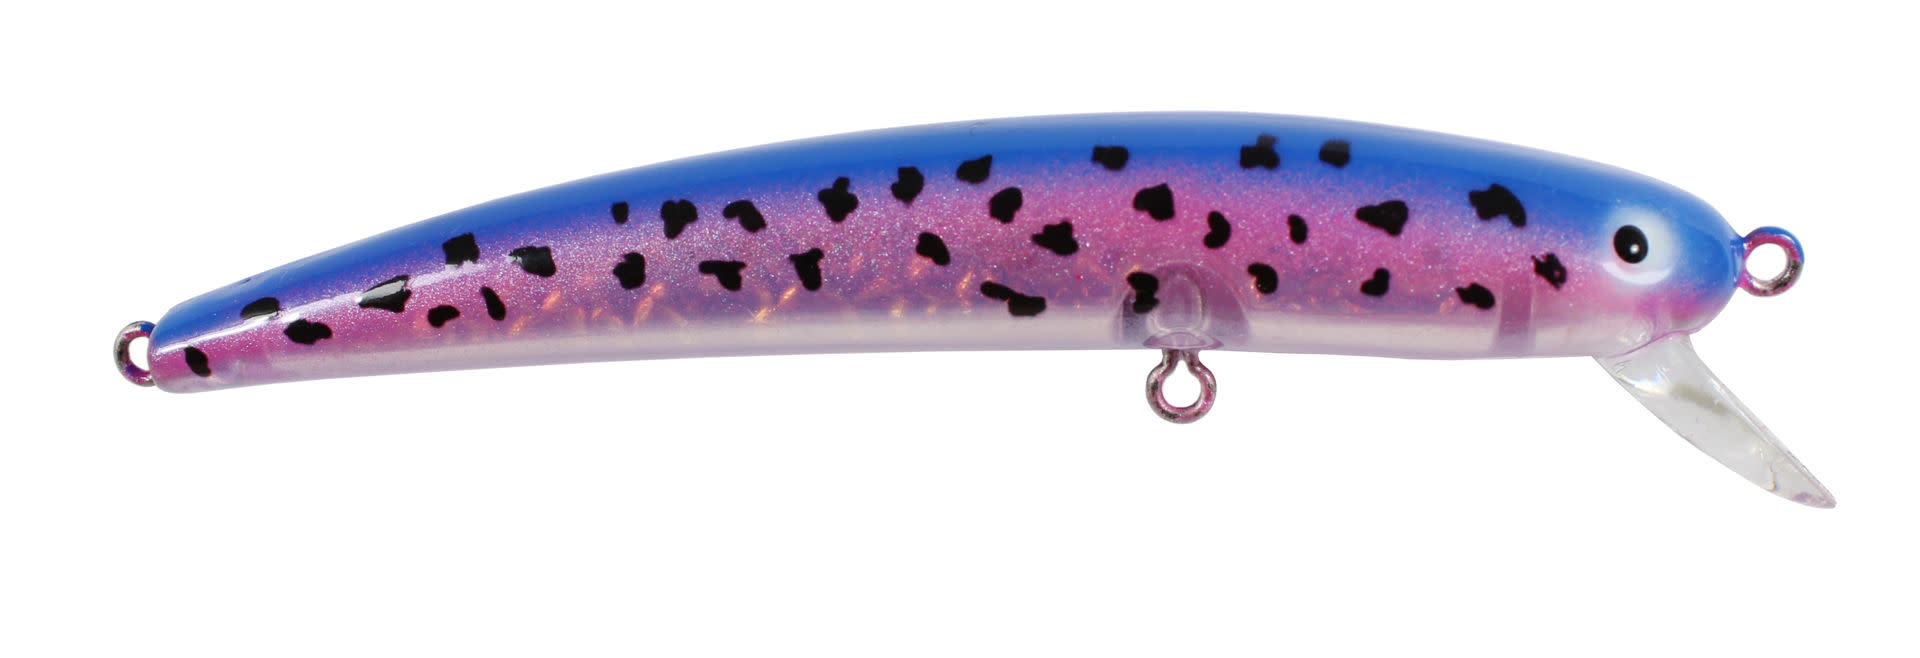 BAY RAT LURES TRIPLE S EXCLUSIVE LONG SHALLOW 4 38 3-5 DEPTH 716OZ DIRTY  COTTON CANDY MFG# 26530 - Gagnon Sporting Goods